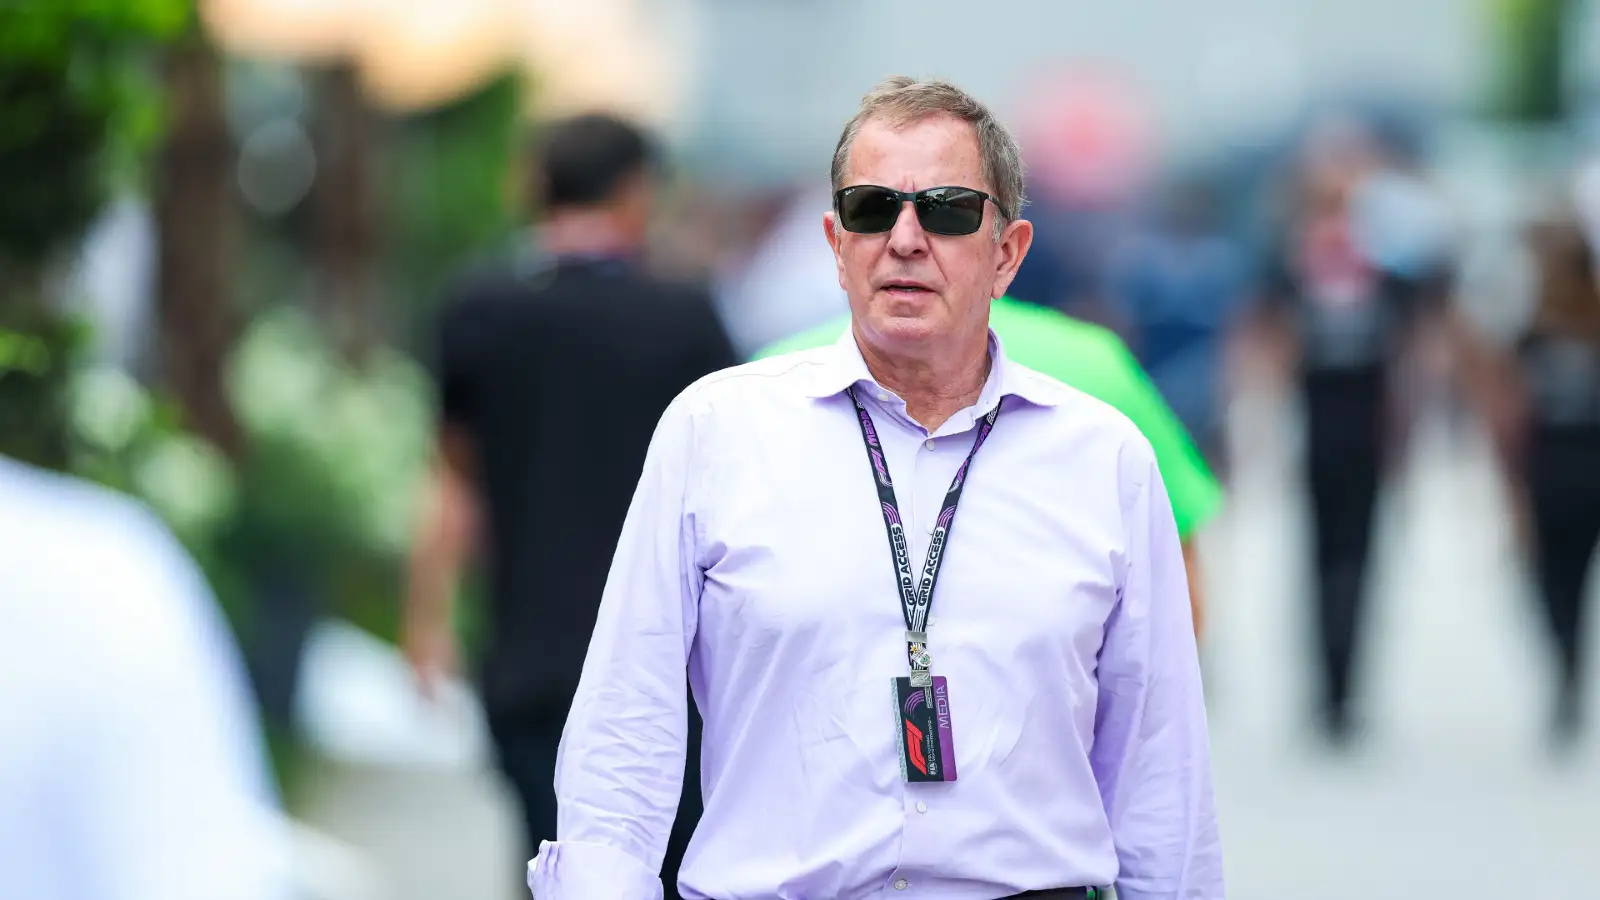 Sky F1 broadcaster Martin Brundle walks through the paddock at the Singapore Grand Prix.